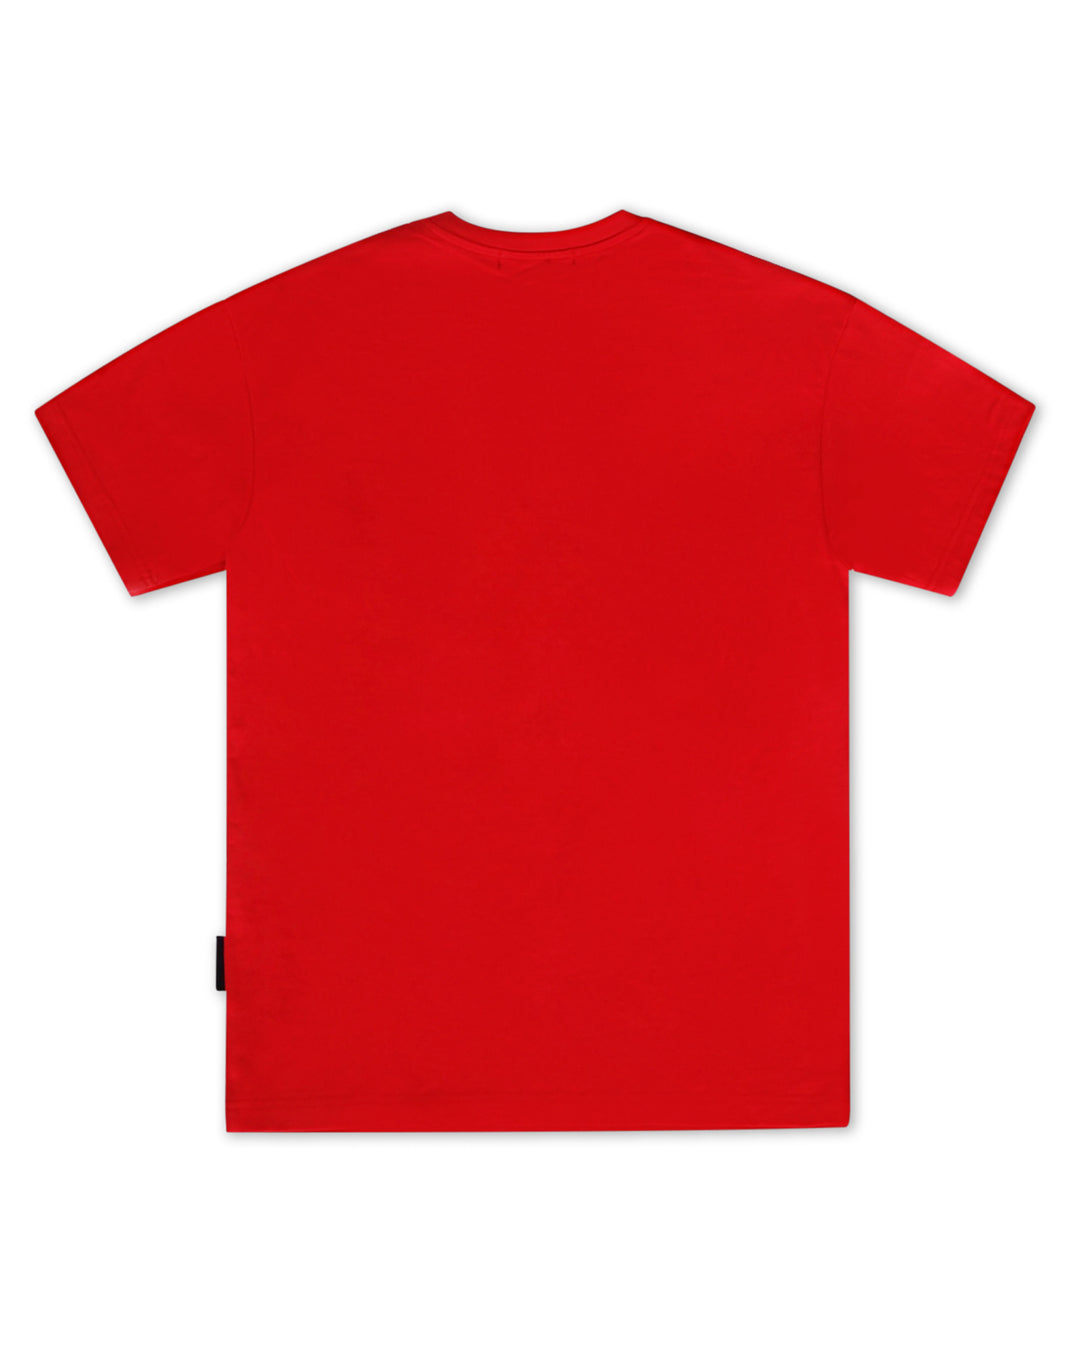 Arch Tee in Red/Black